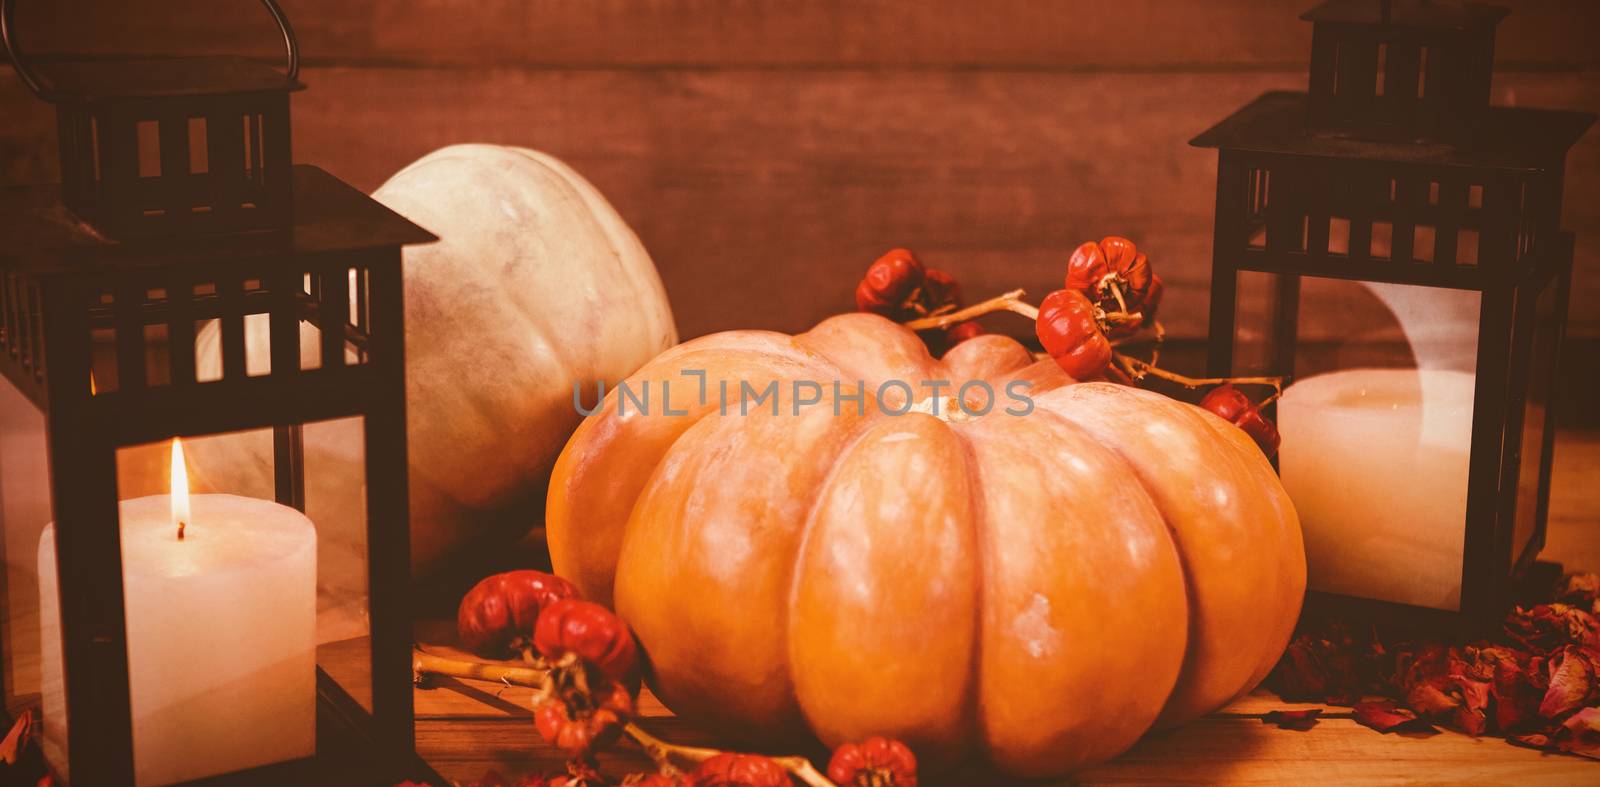 Pumpkins with candles on table during Halloween by Wavebreakmedia